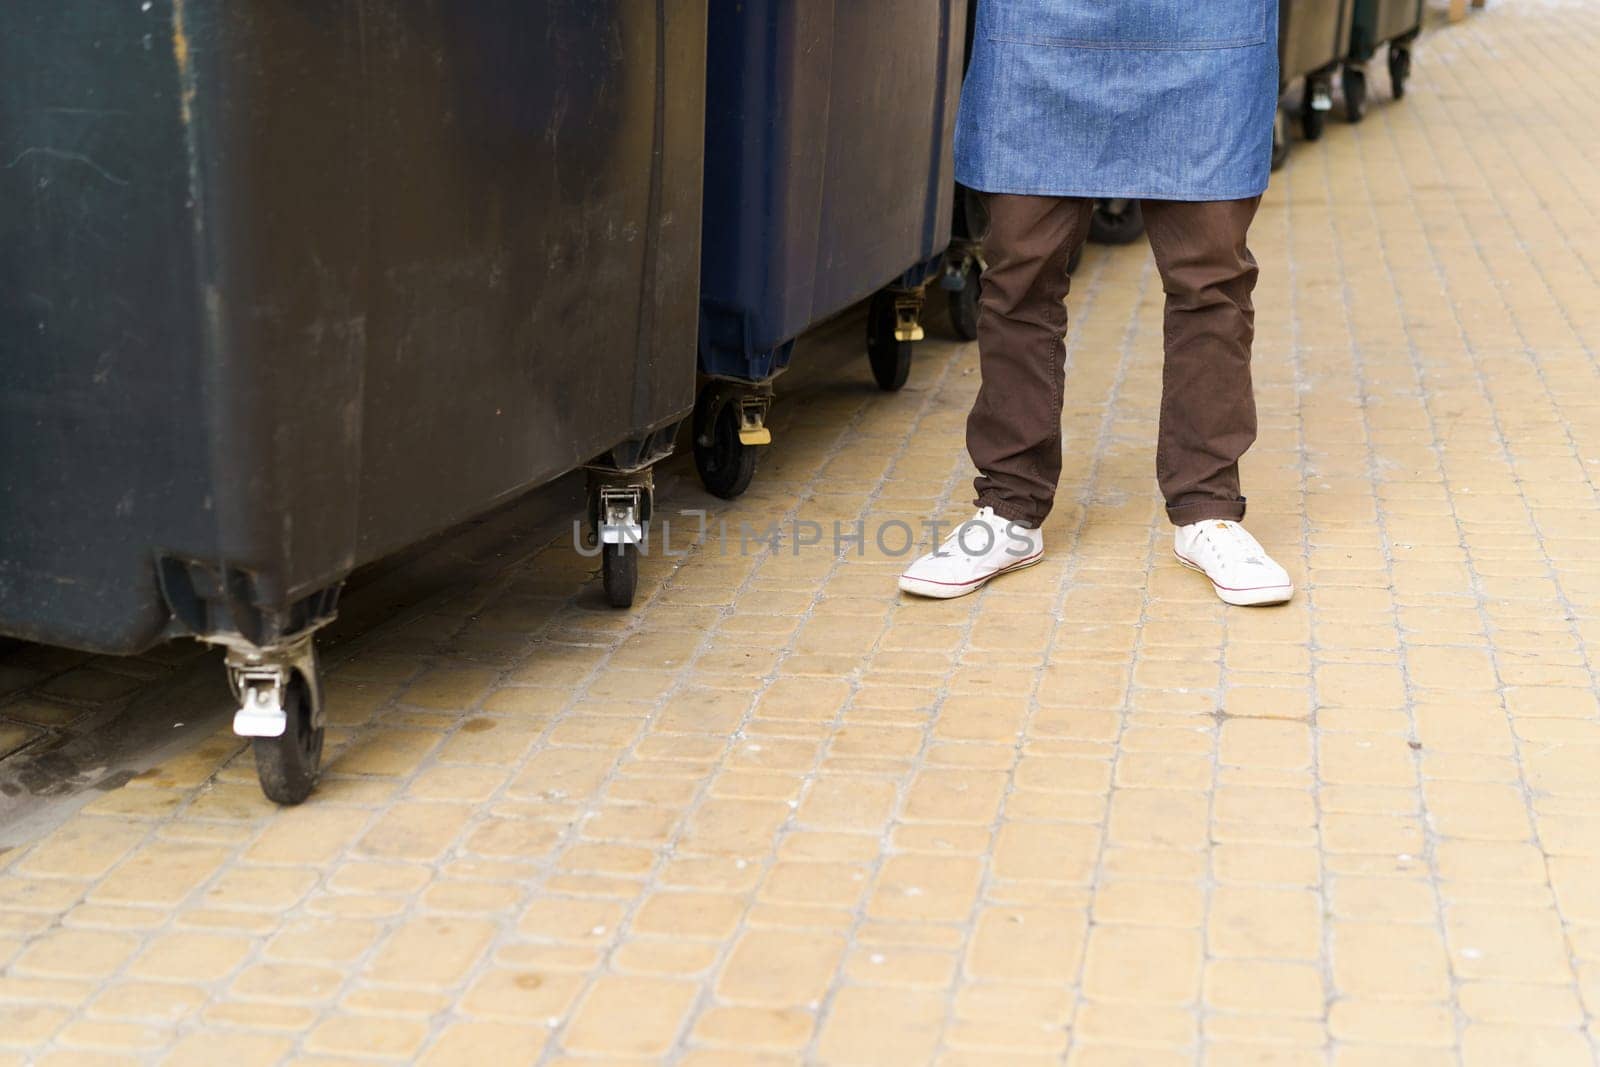 Garbage city trash cans, featuring view of trash cans in back yard and feet of kitchen worker. Presence of trash cans highlights importance of proper waste management and recycling in urban areas. . High quality photo